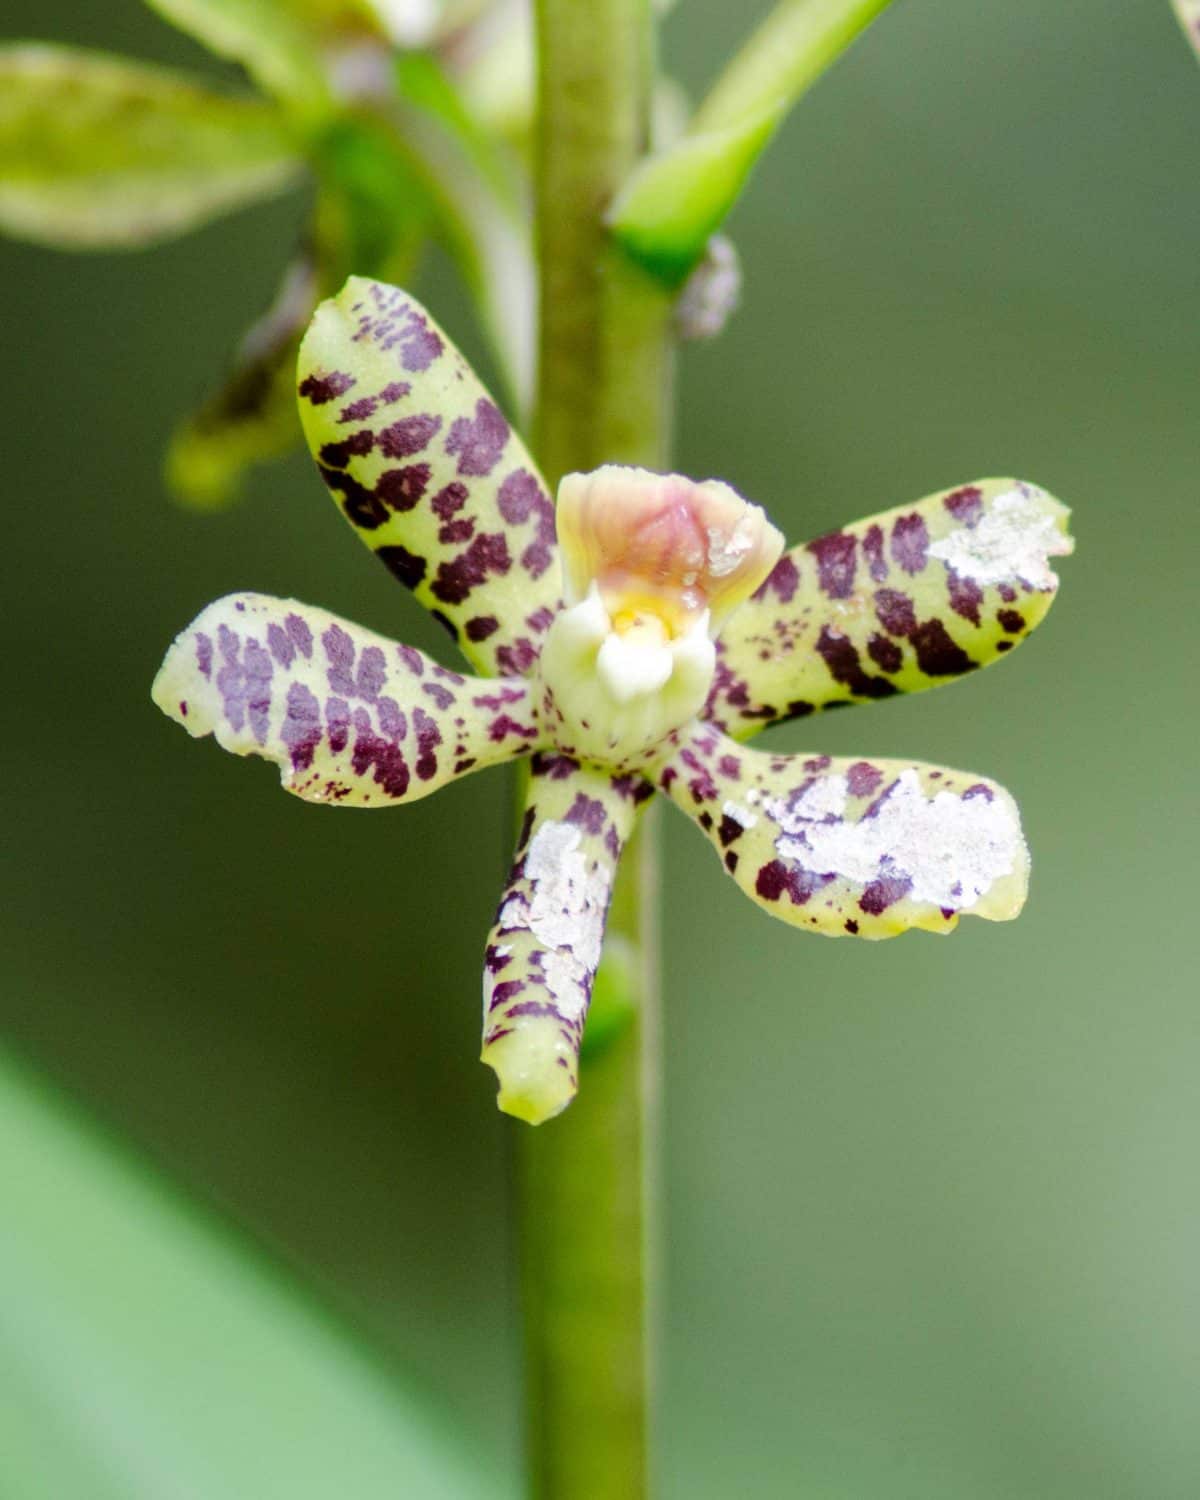 Orchids from the Orchidarium San Cristobal in the Napo Province, Ecuador, February 2016 | ©Angela Drake